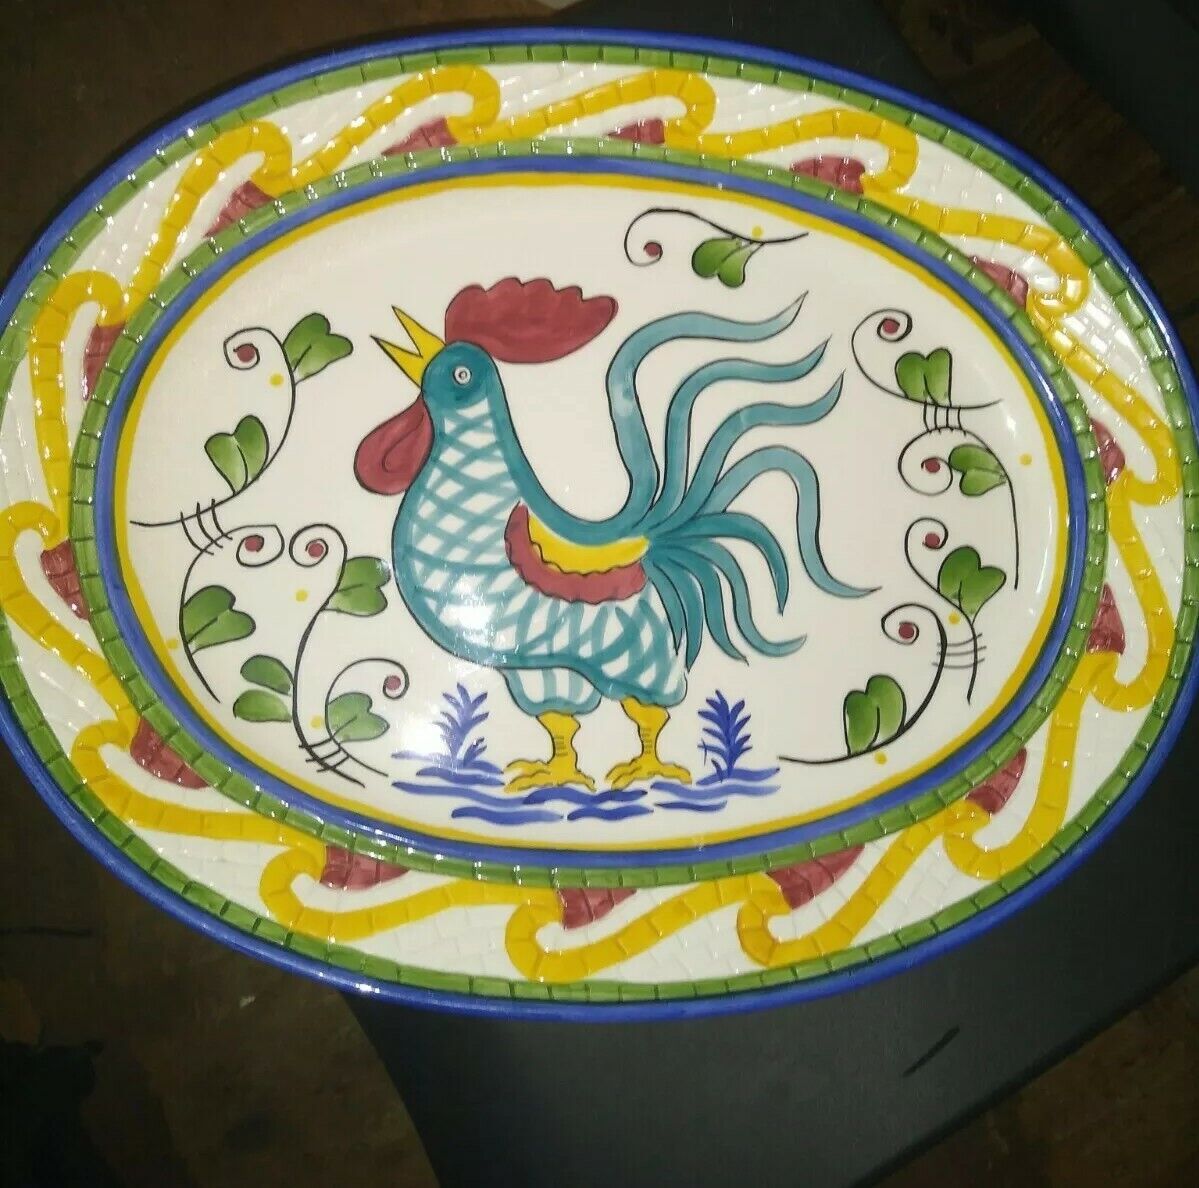 Rooster Plater hand painted 1999 South San Francisco 20x16 Clay Art Mosaic 